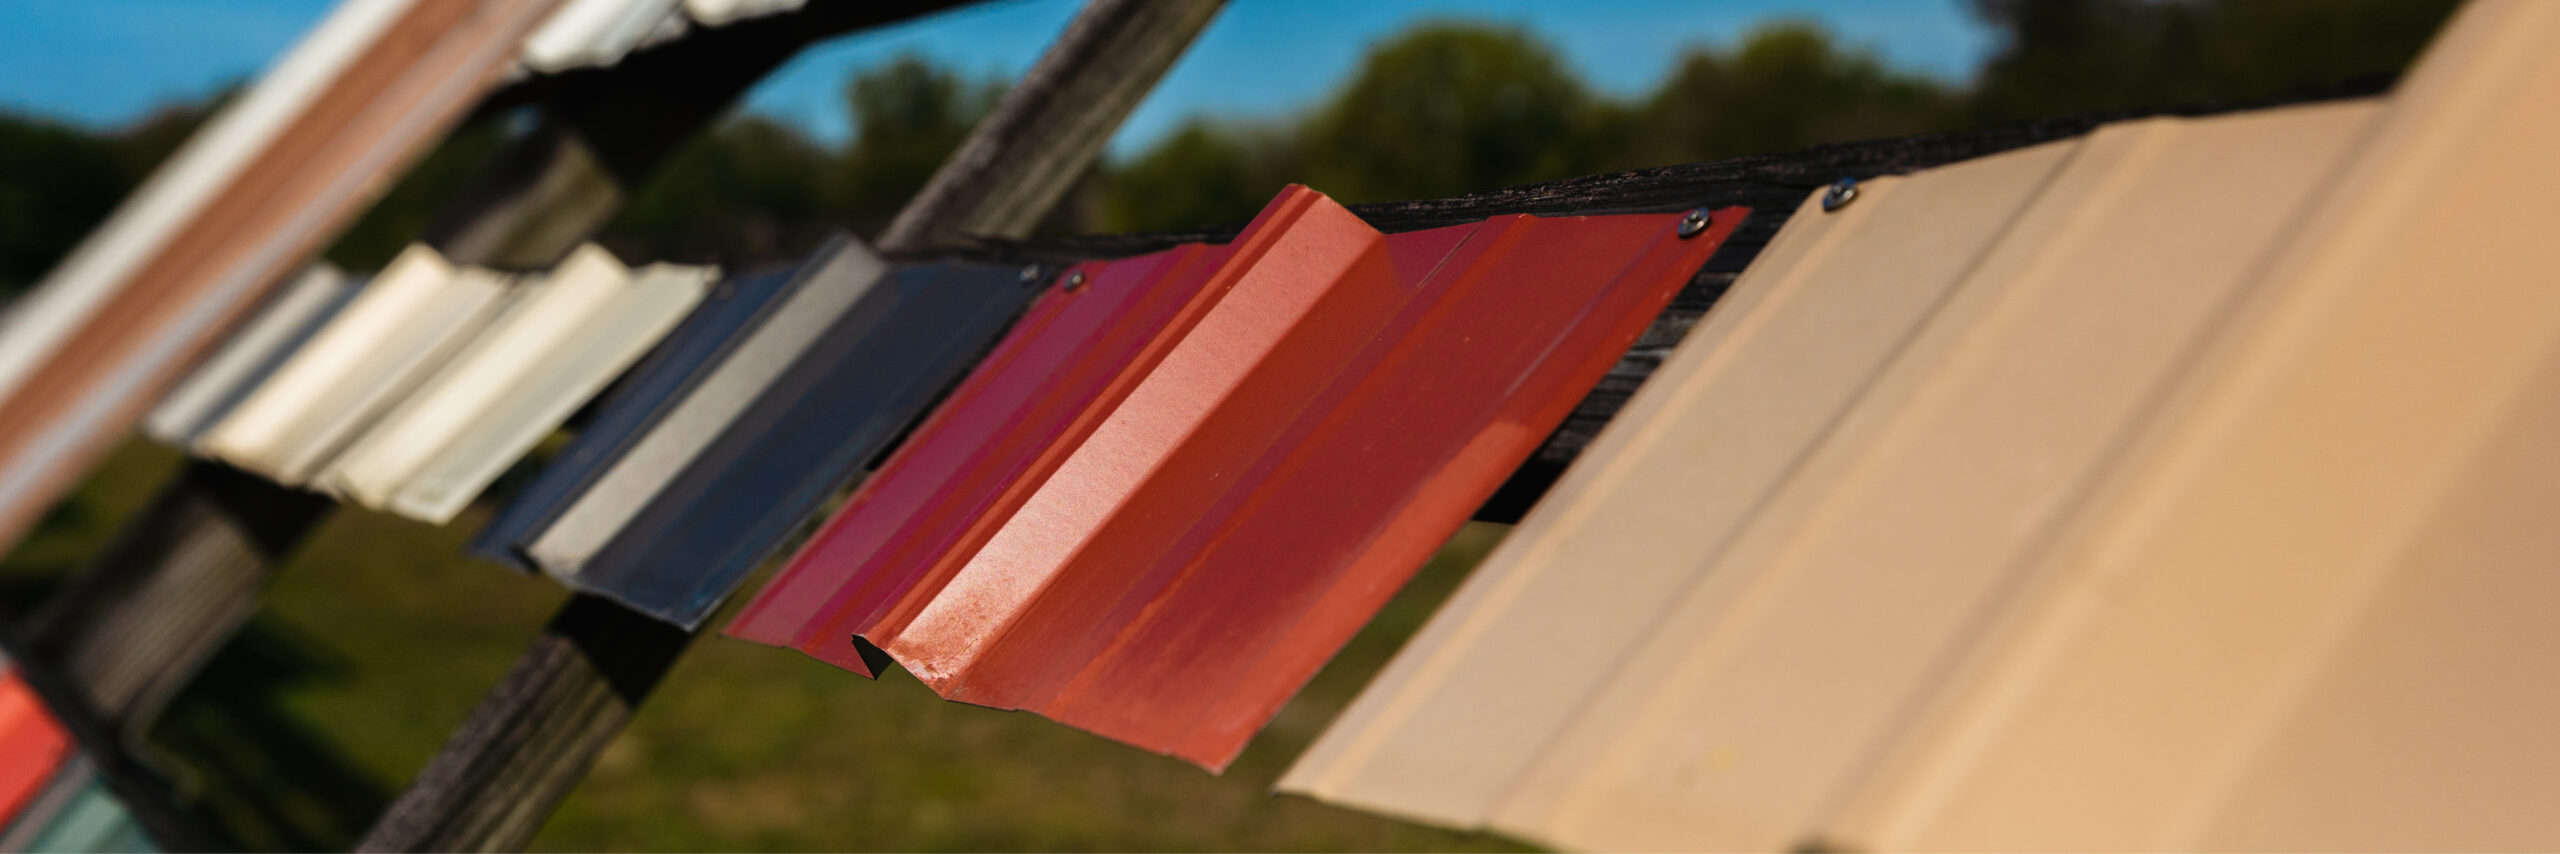 Swatches of Kynar 500's different paint coating systems.